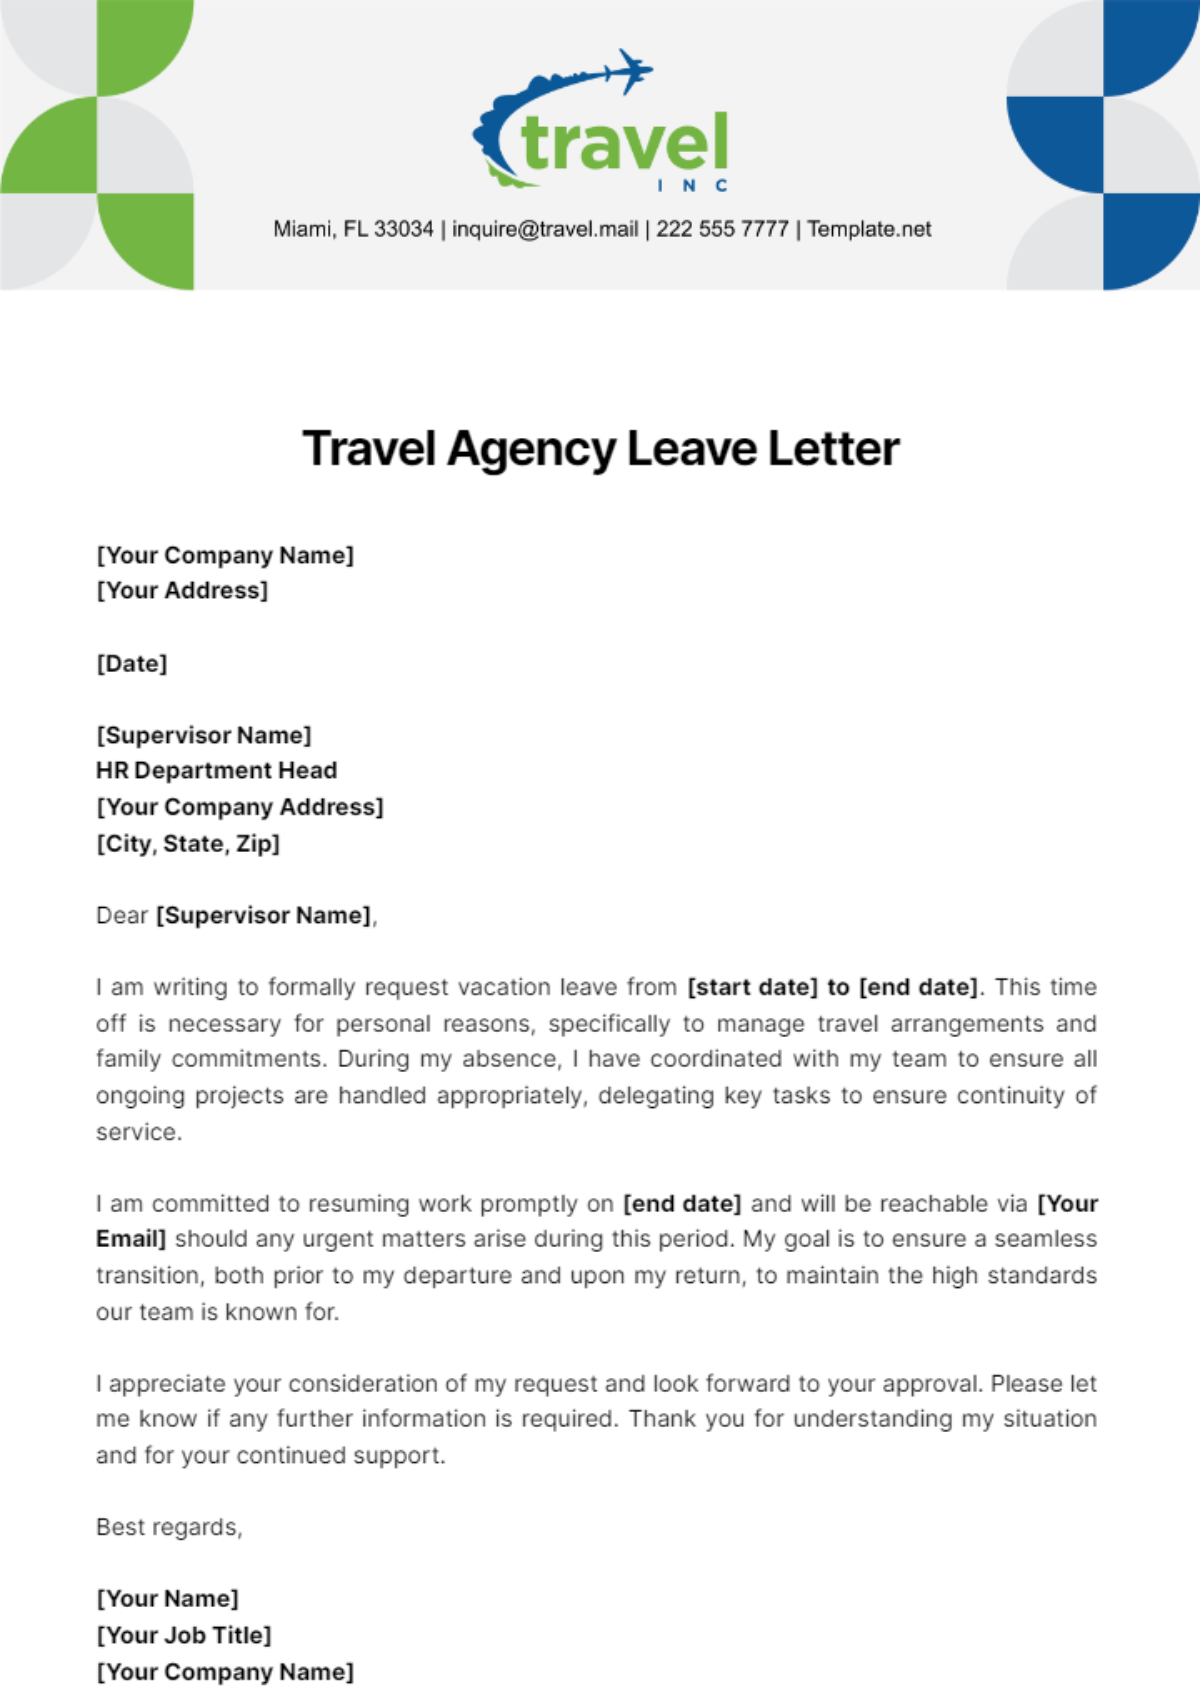 Travel Agency Leave Letter Template